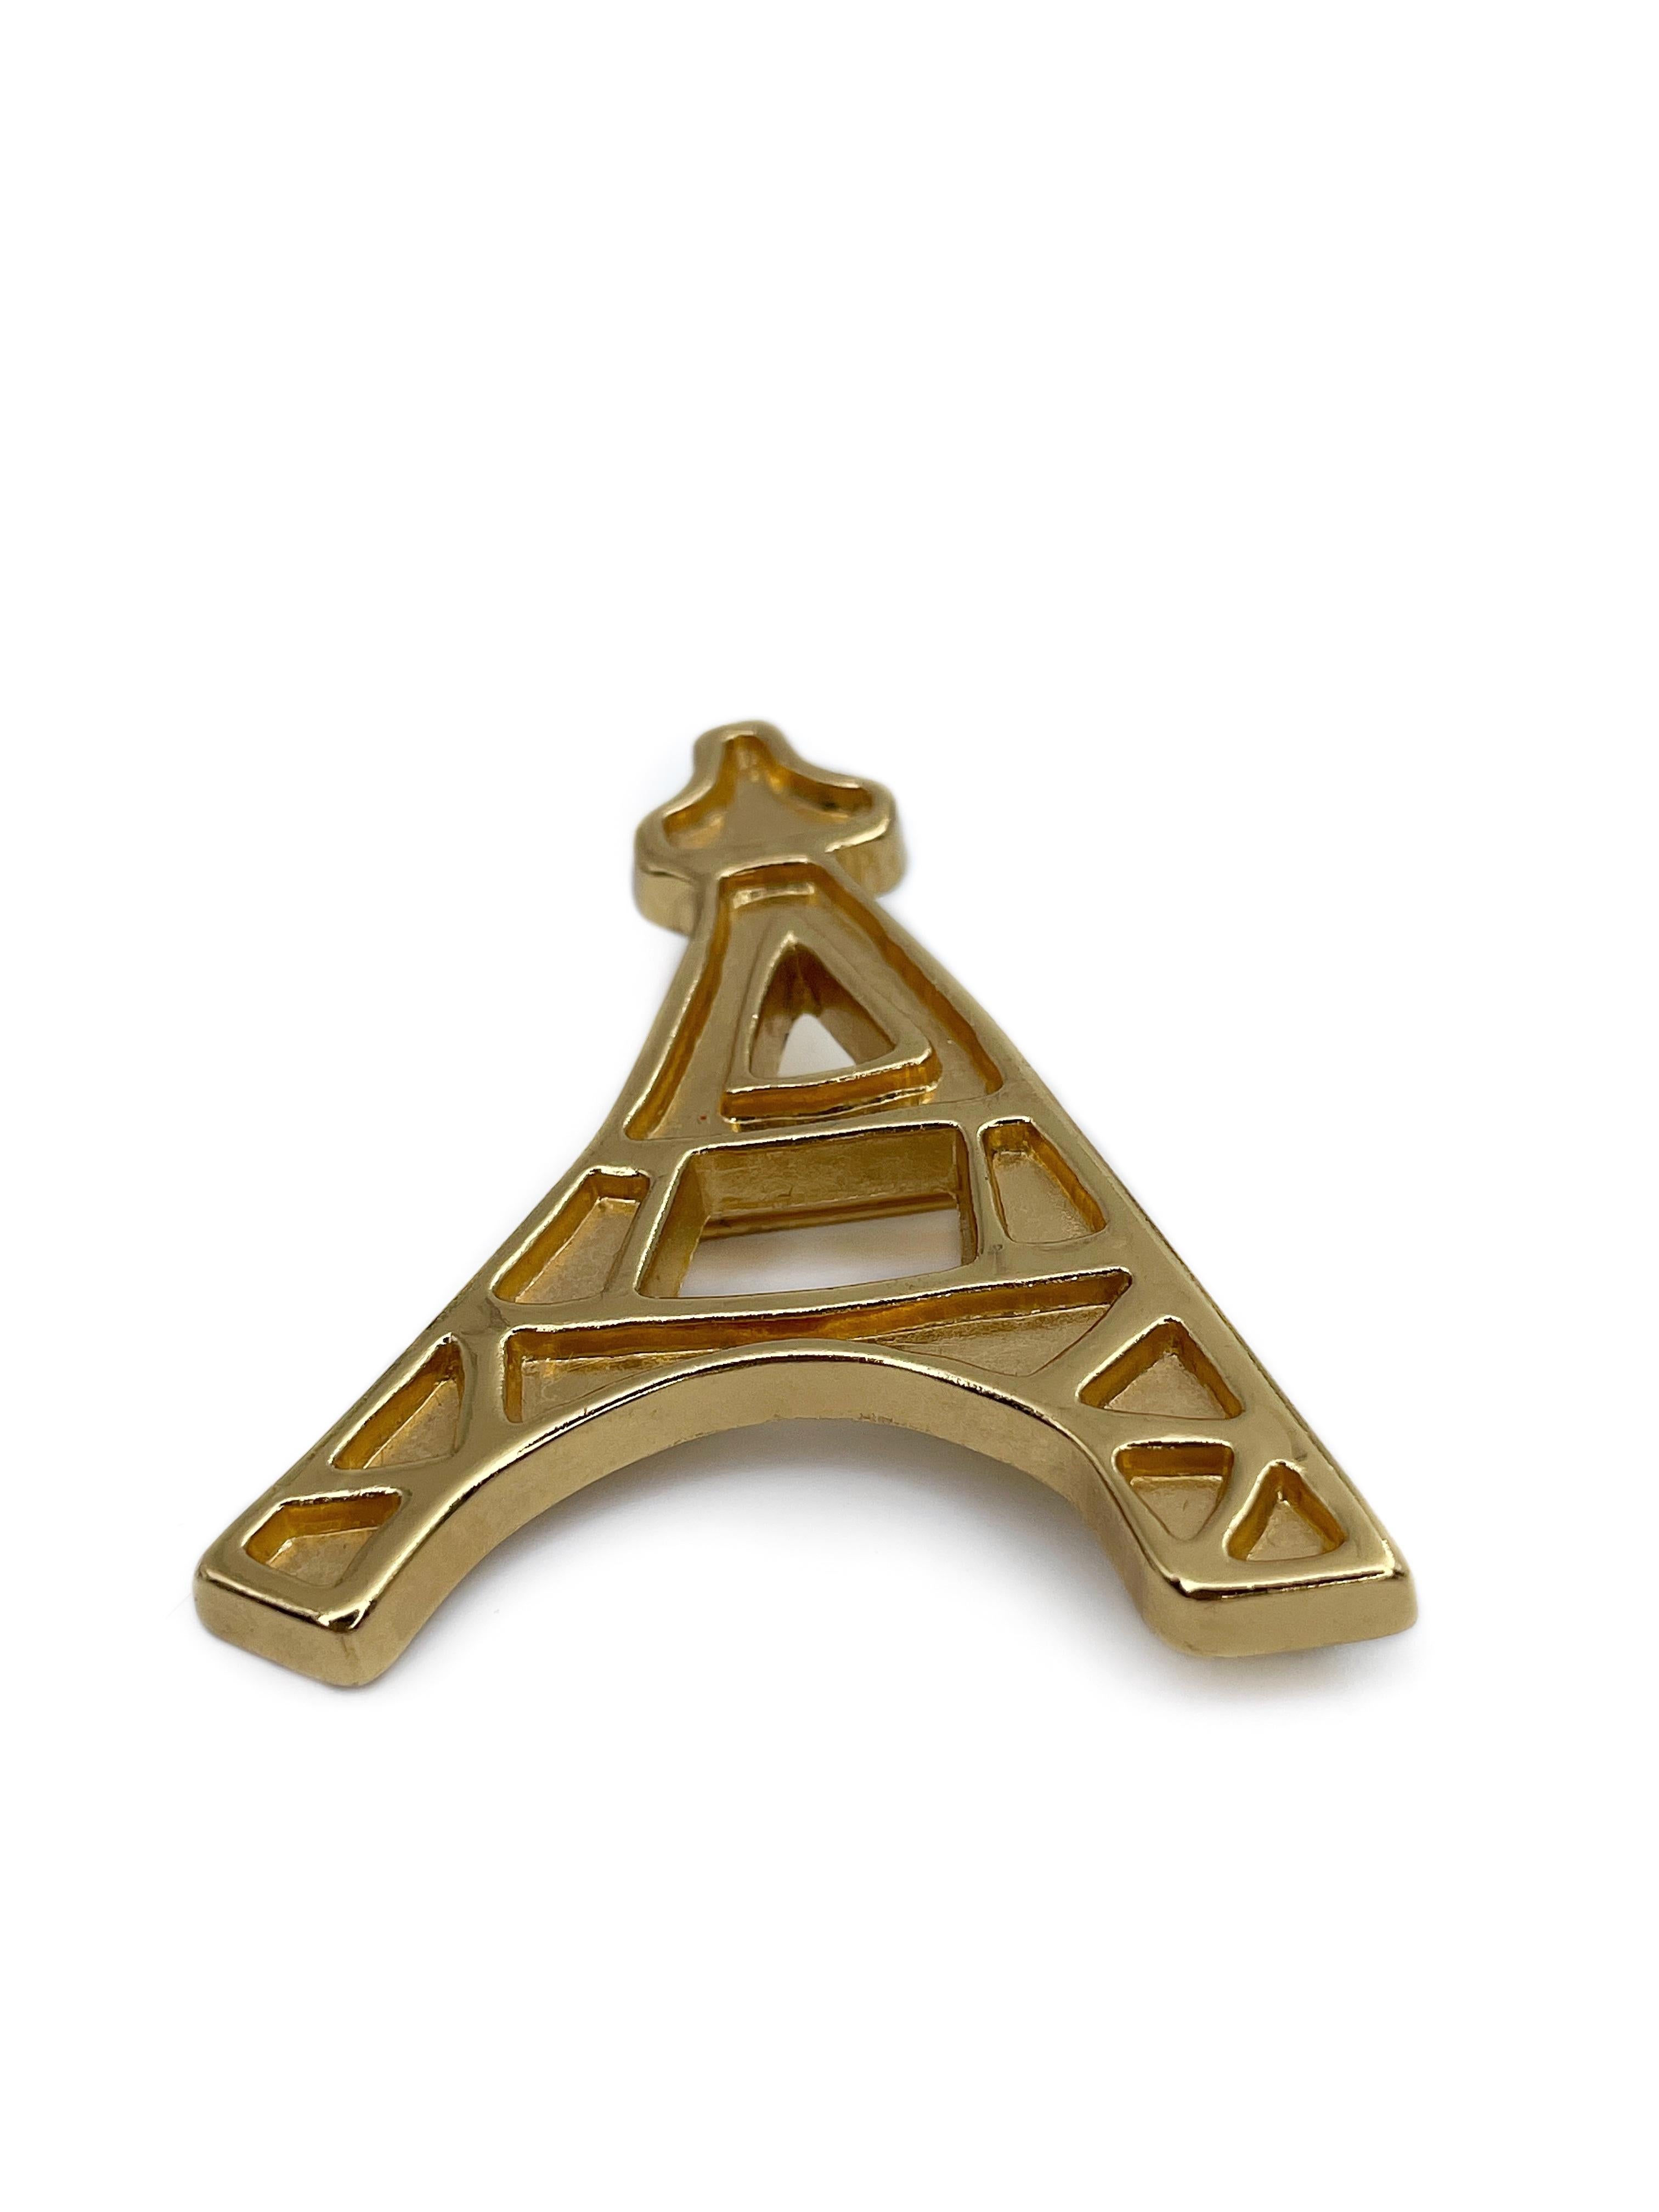 This is a subtle gold tone vintage pin brooch depicting the silhouette of the Eiffel tower. This piece is gold plated, designed by YSL in 1980’s.

Markings: “YSL. Made in France” (shown in photos).

Size: 5.5x4.3cm

———

If you have any questions,